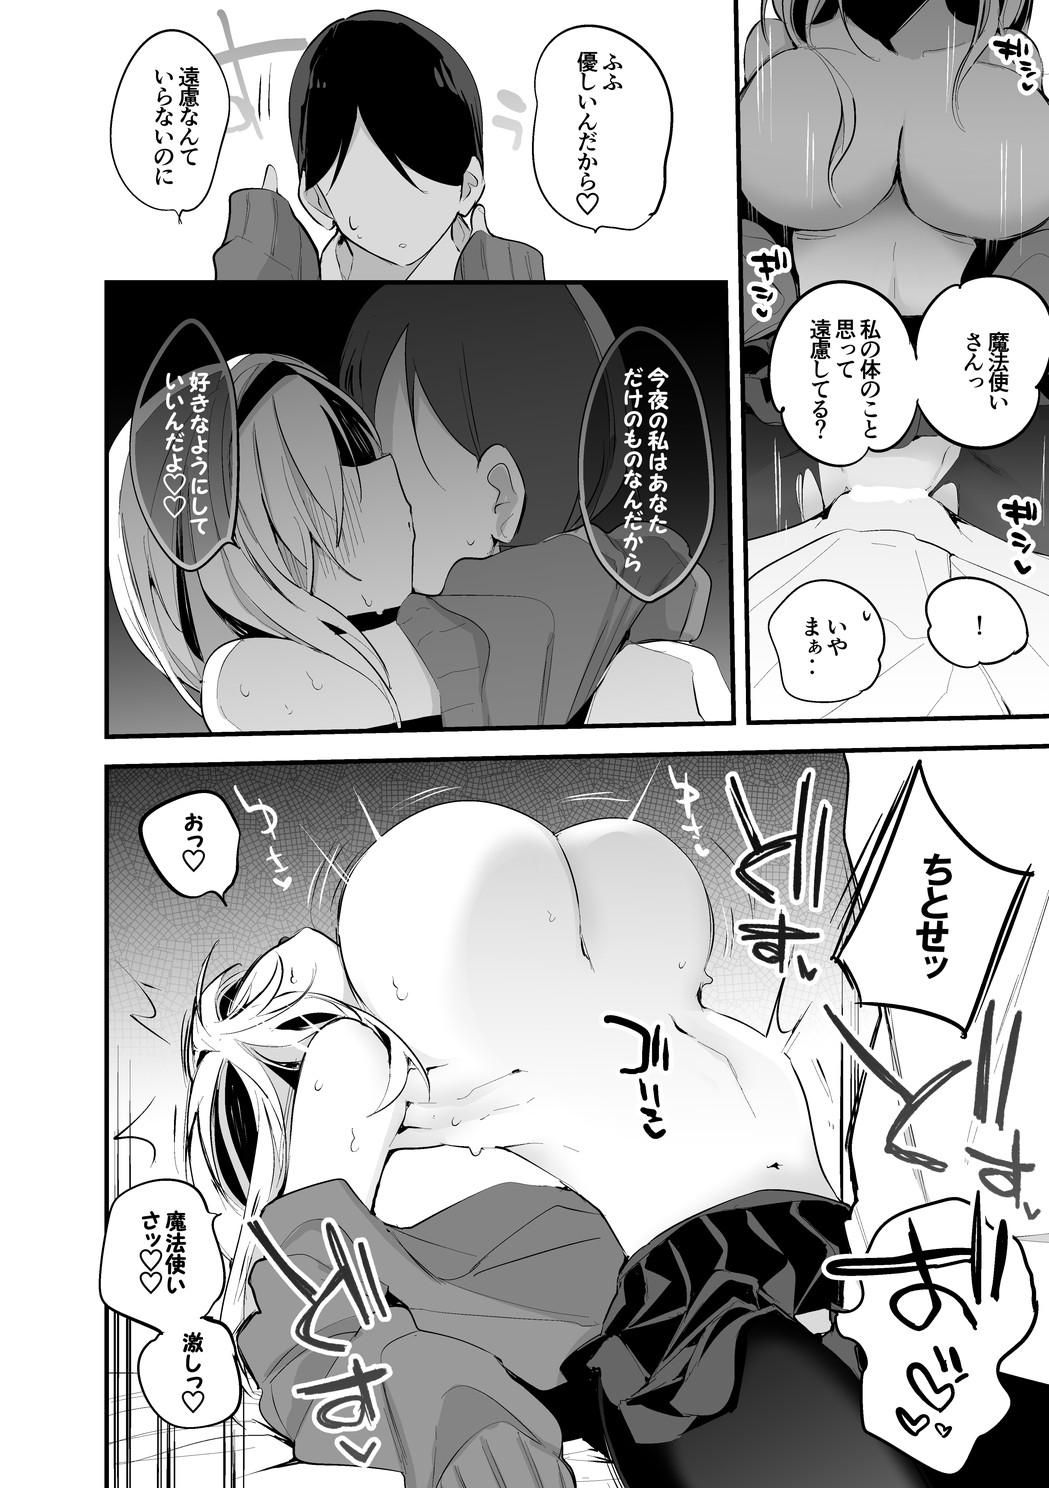 Perra ちとせはもっと激しく編 - The idolmaster High Definition - Page 5